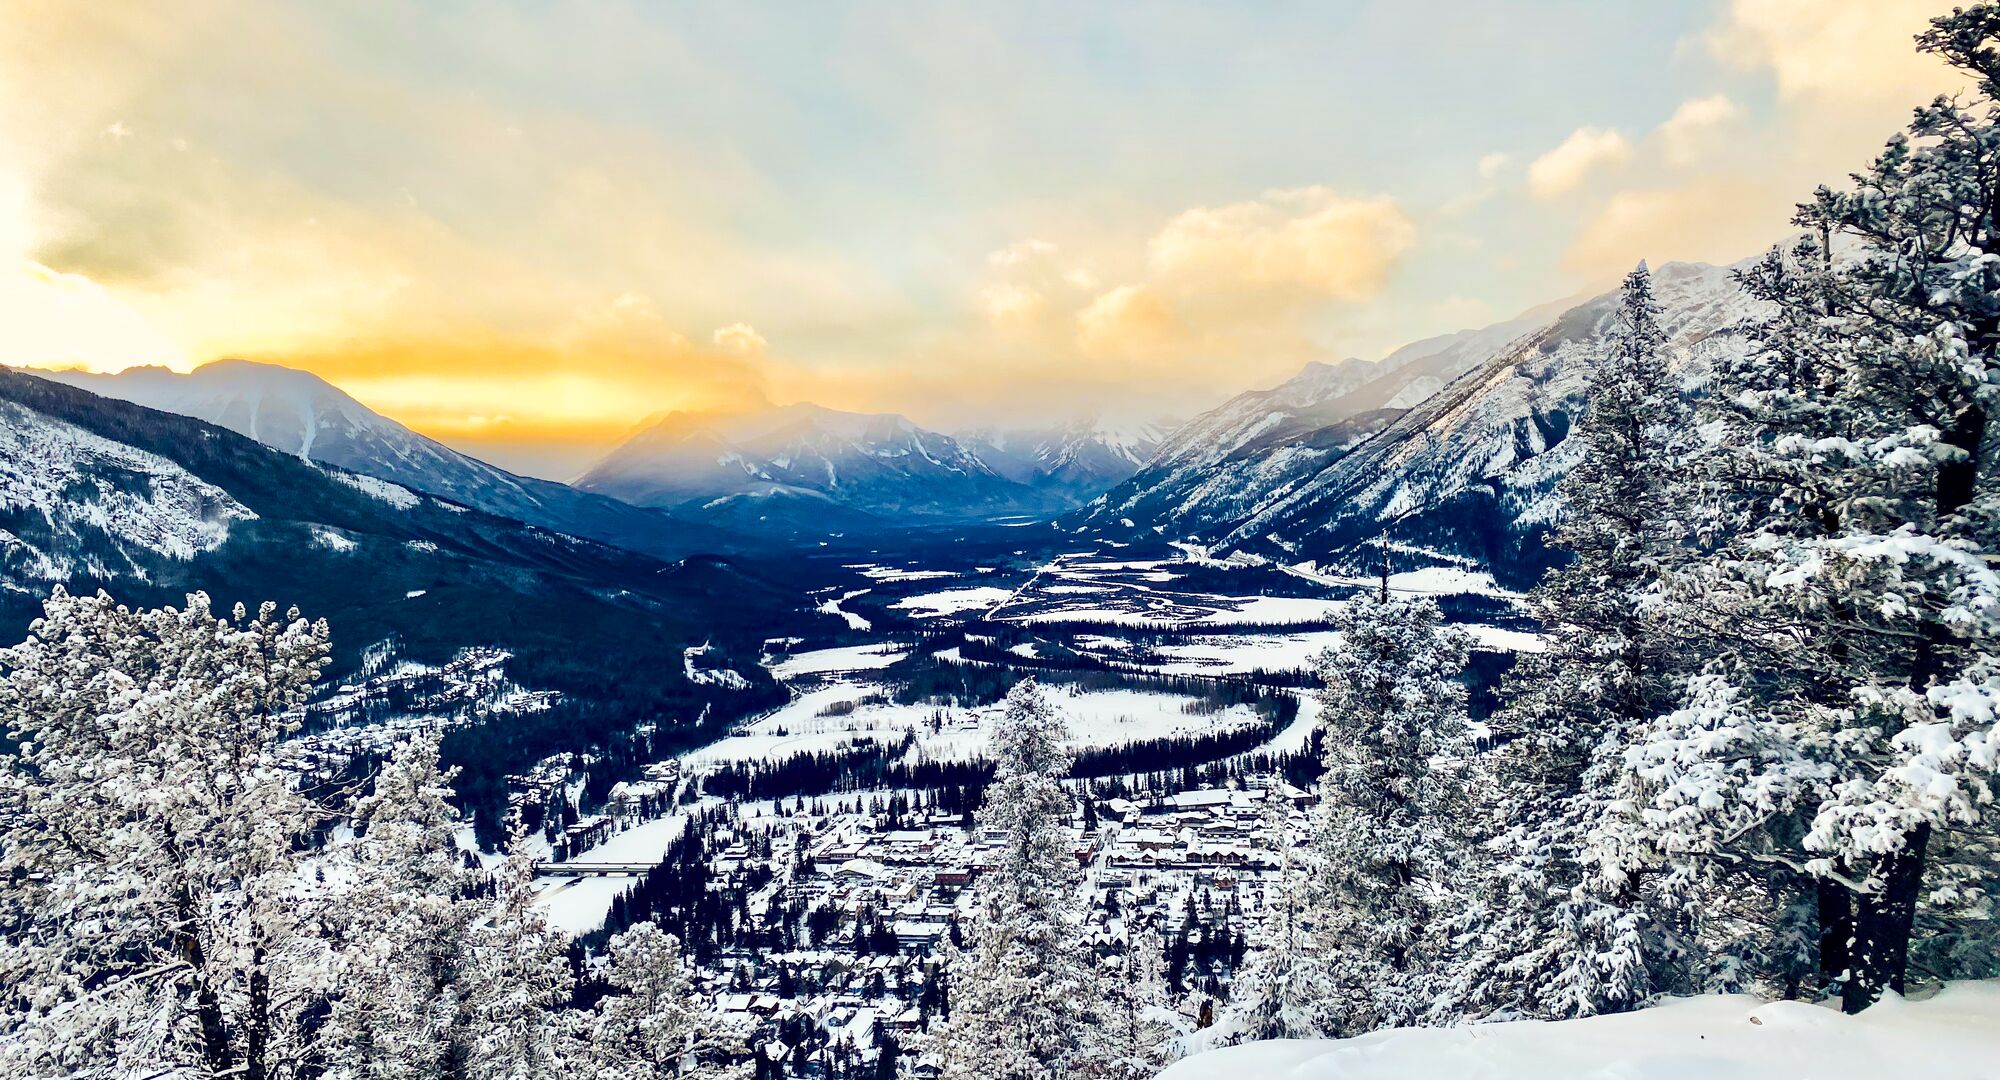 The view from the top of Tunnel Mountain at sunset in Banff National Park.